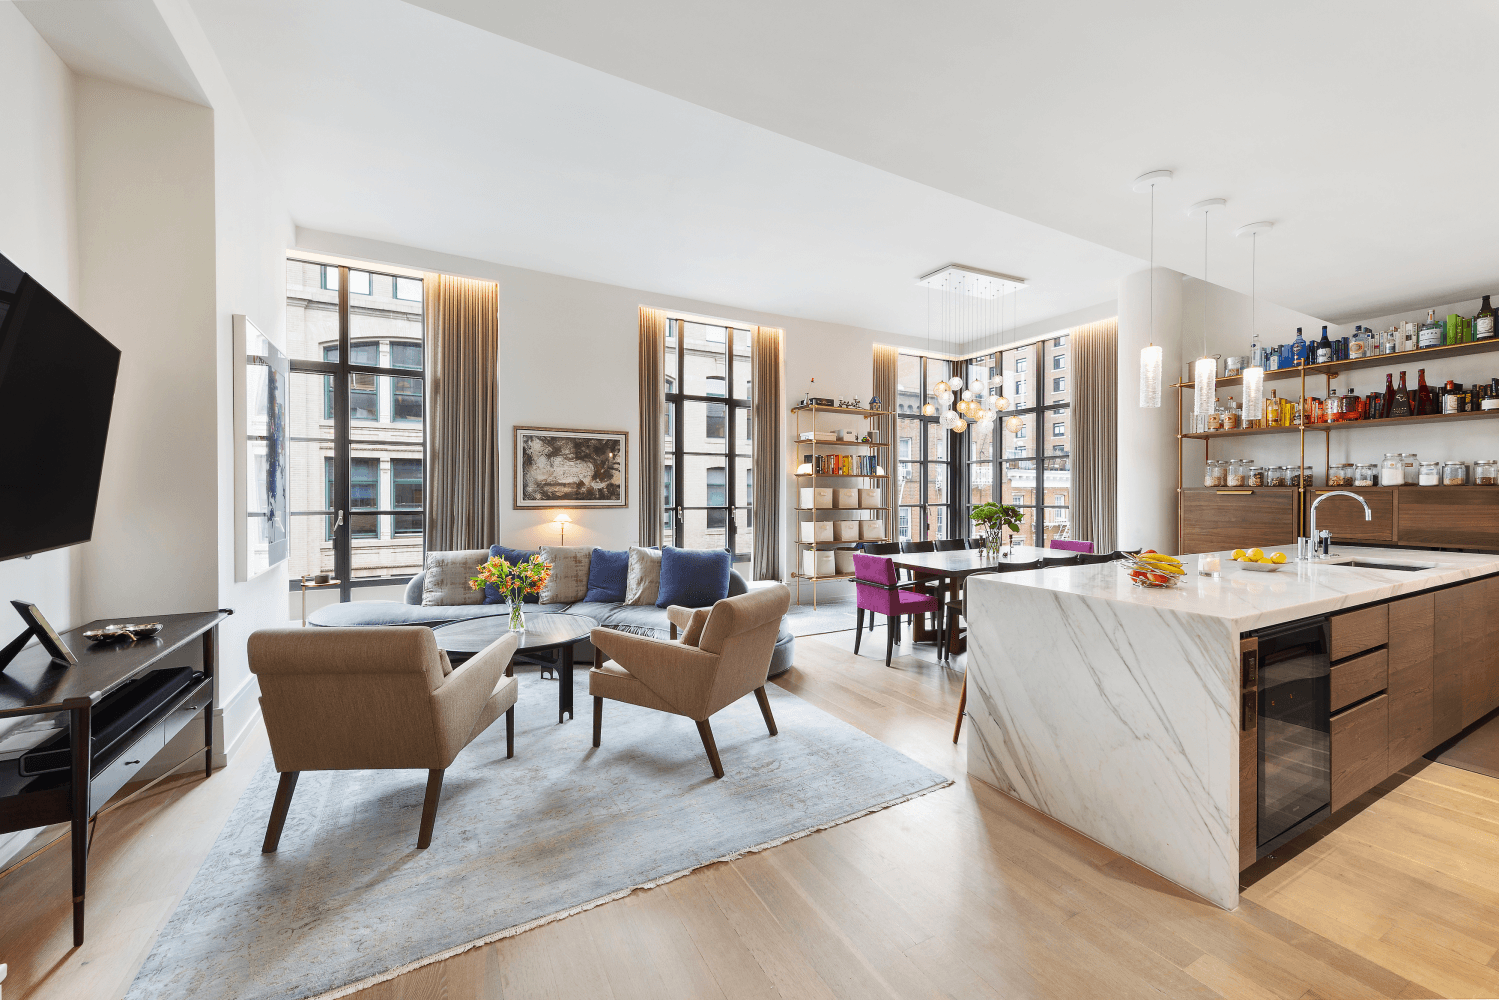 Rarely available sprawling 3 bed, 3 bath residence in the village's premiere boutique condominium, 215 Sullivan Street, now available for purchase.